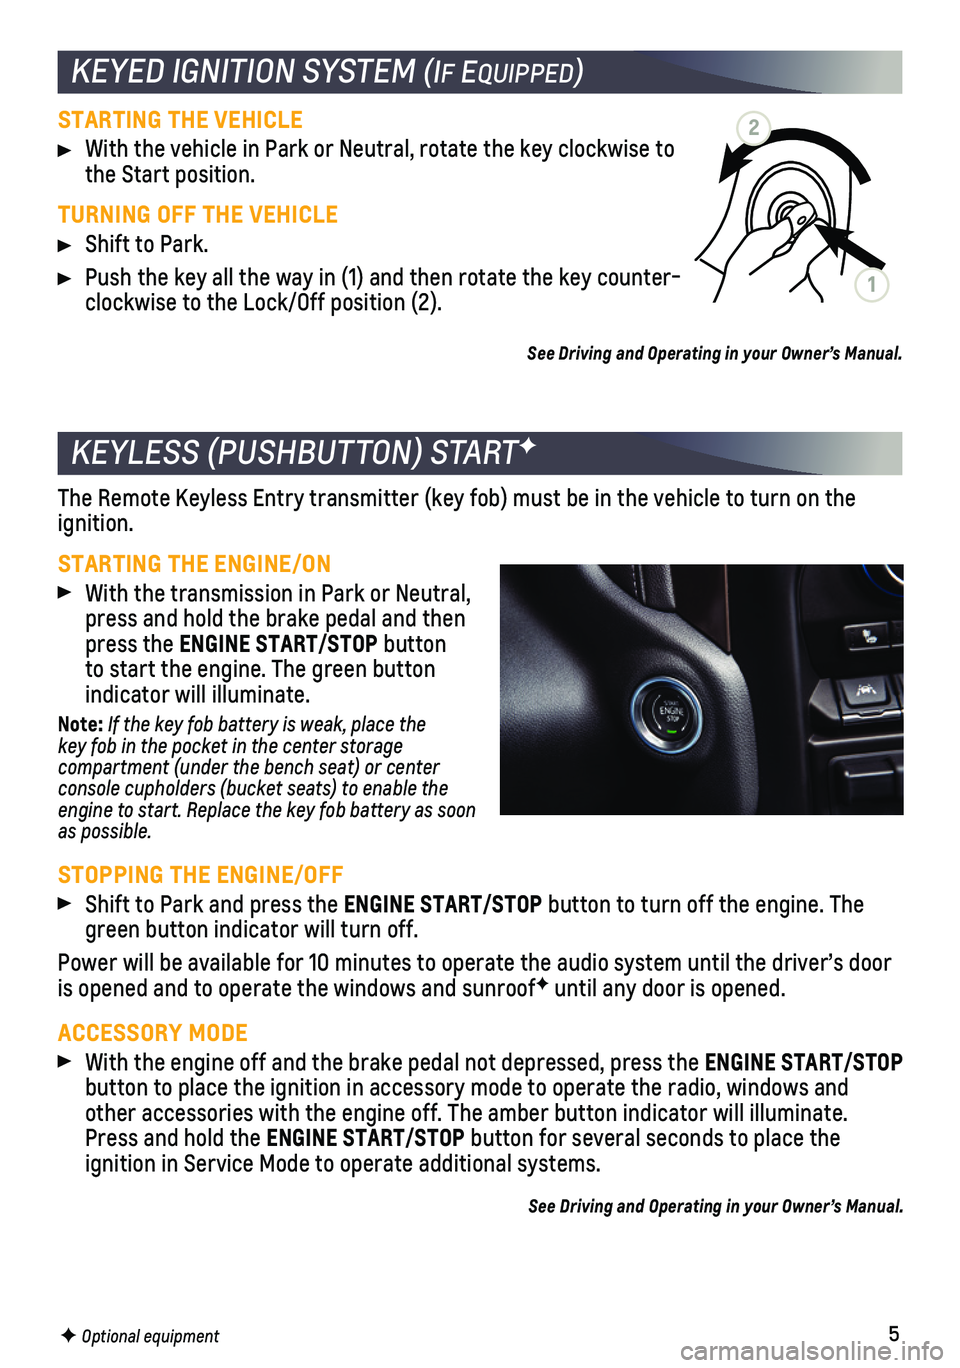 CHEVROLET SILVERADO 1500 2021  Get To Know Guide 5
STARTING THE VEHICLE
 With the vehicle in Park or Neutral, rotate the key clockwise to the Start position. 
TURNING OFF THE VEHICLE
 Shift to Park. 
 Push the key all the way in (1) and then rotate 